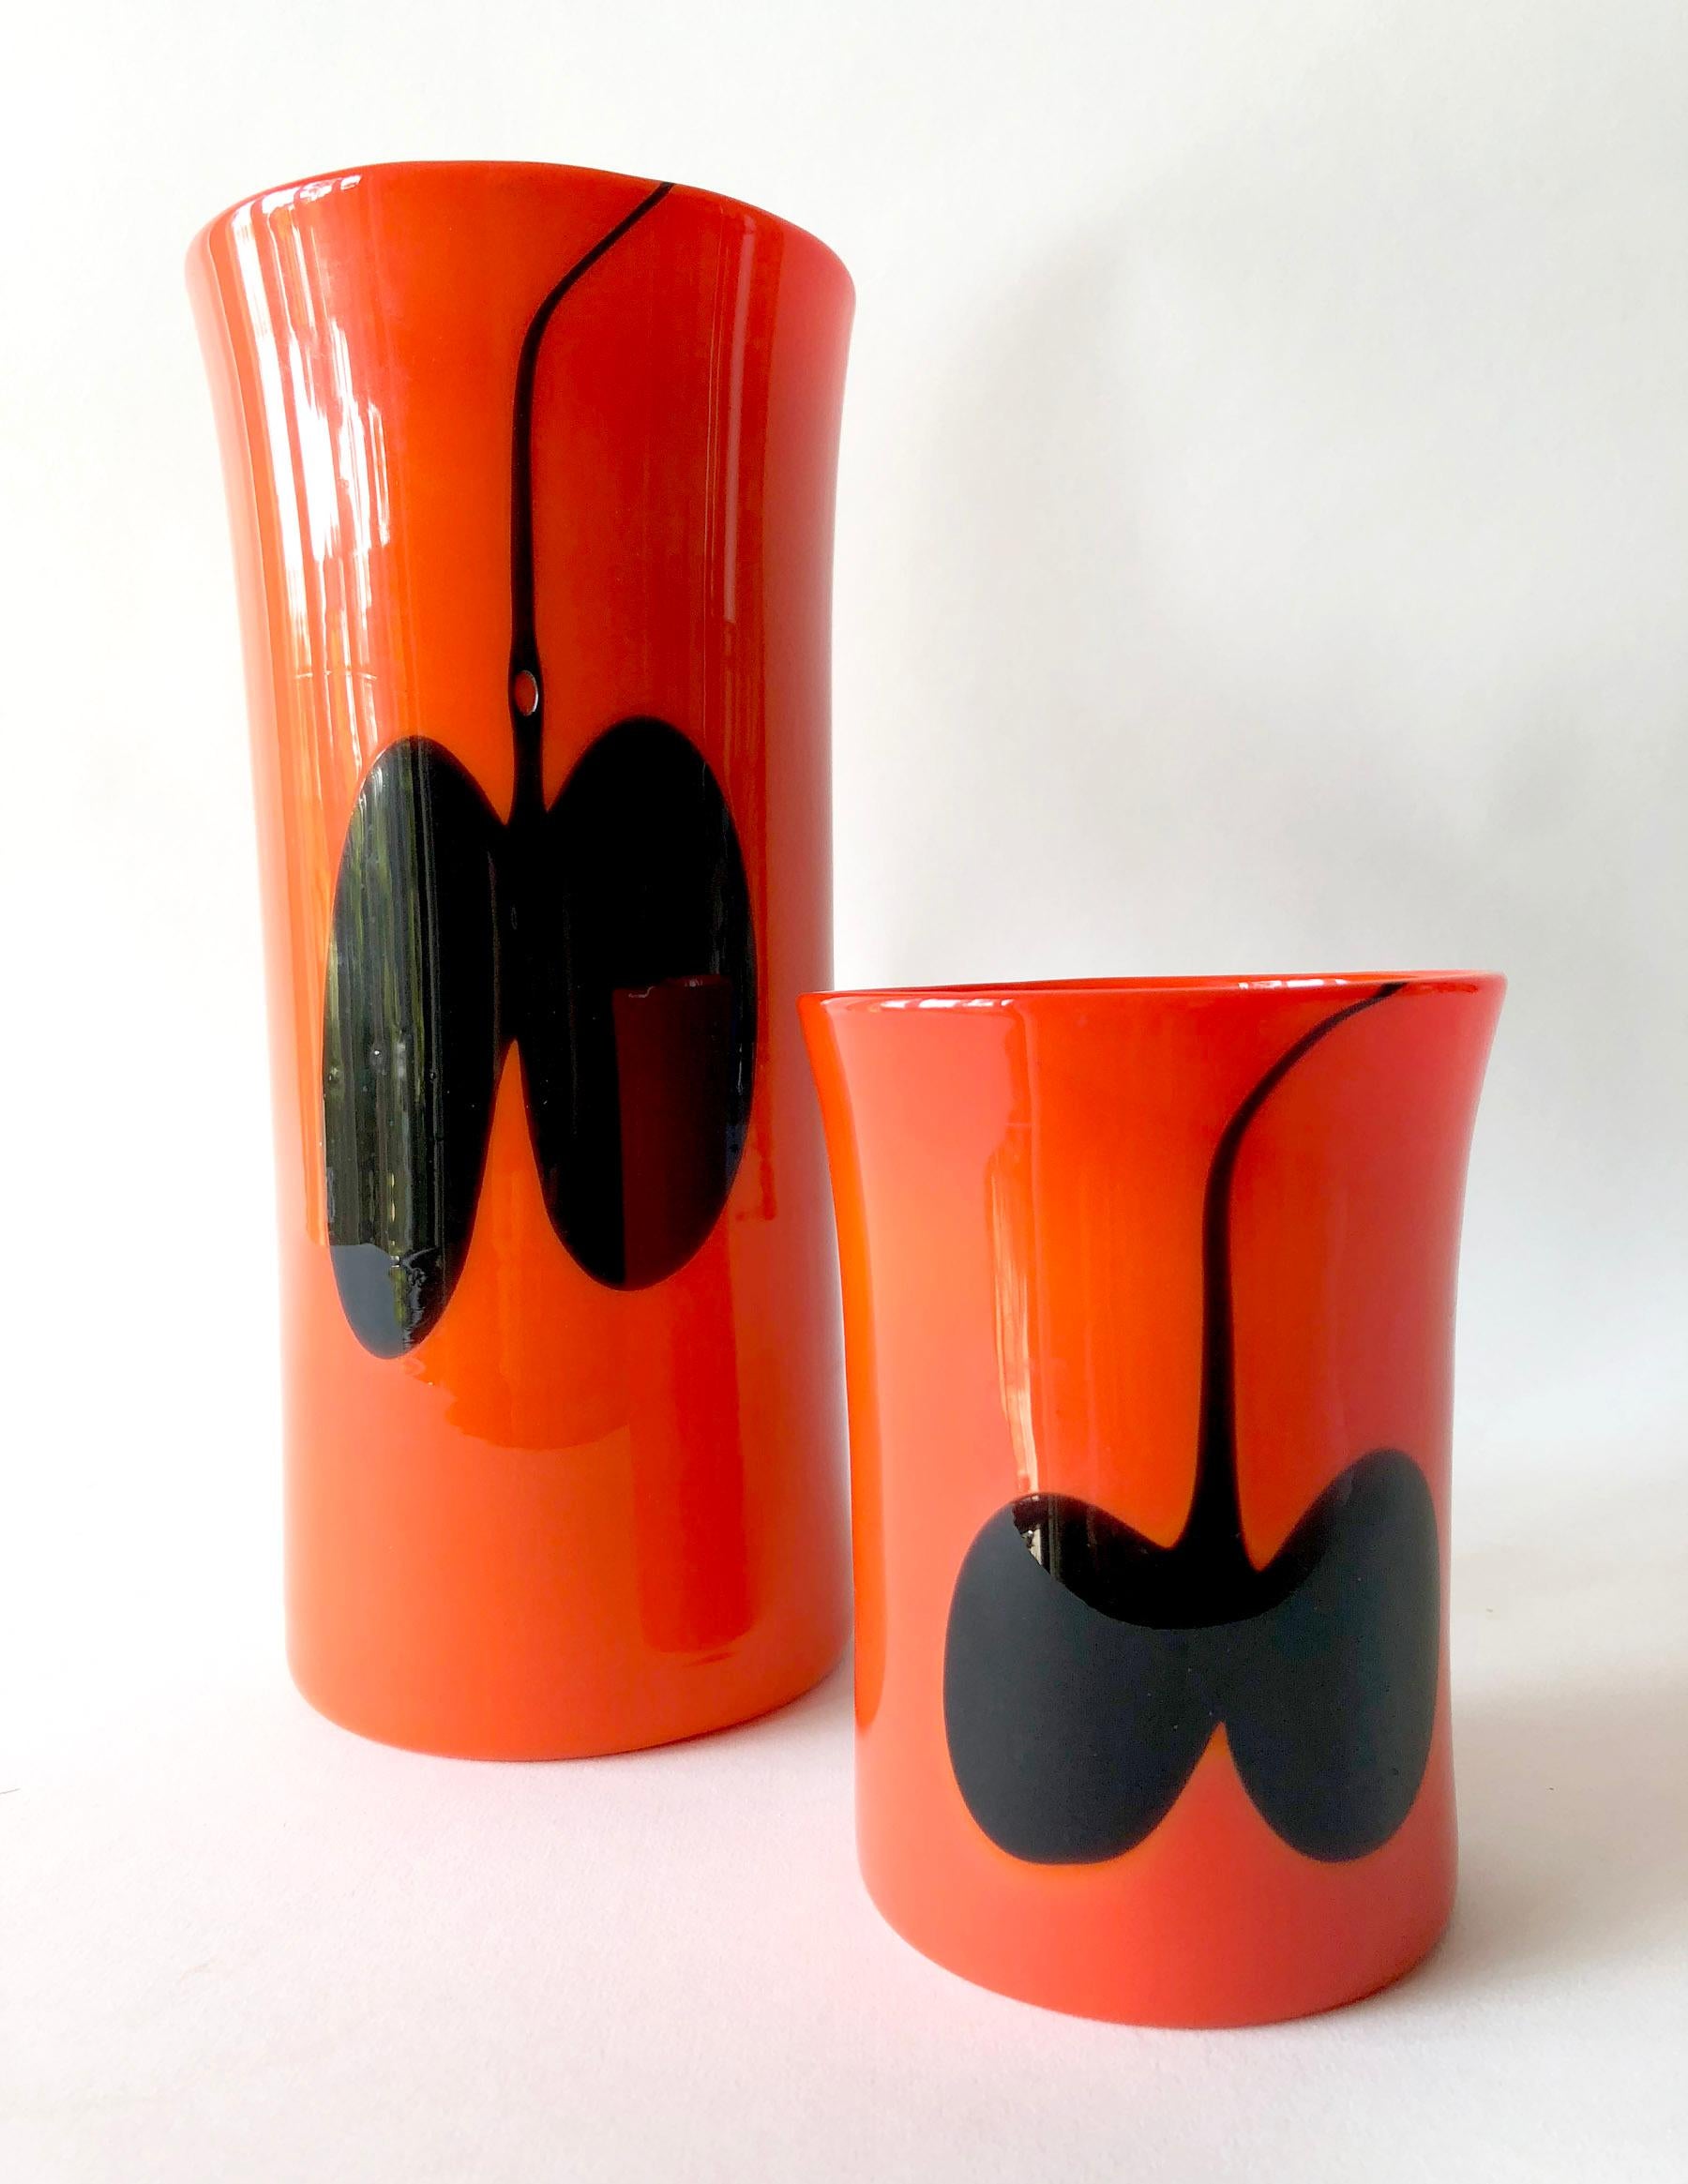 A matching pair of glass vases by Heikki Orvola for Nuutajarvi Notsjo, Finland. Vases measure 10 1/8